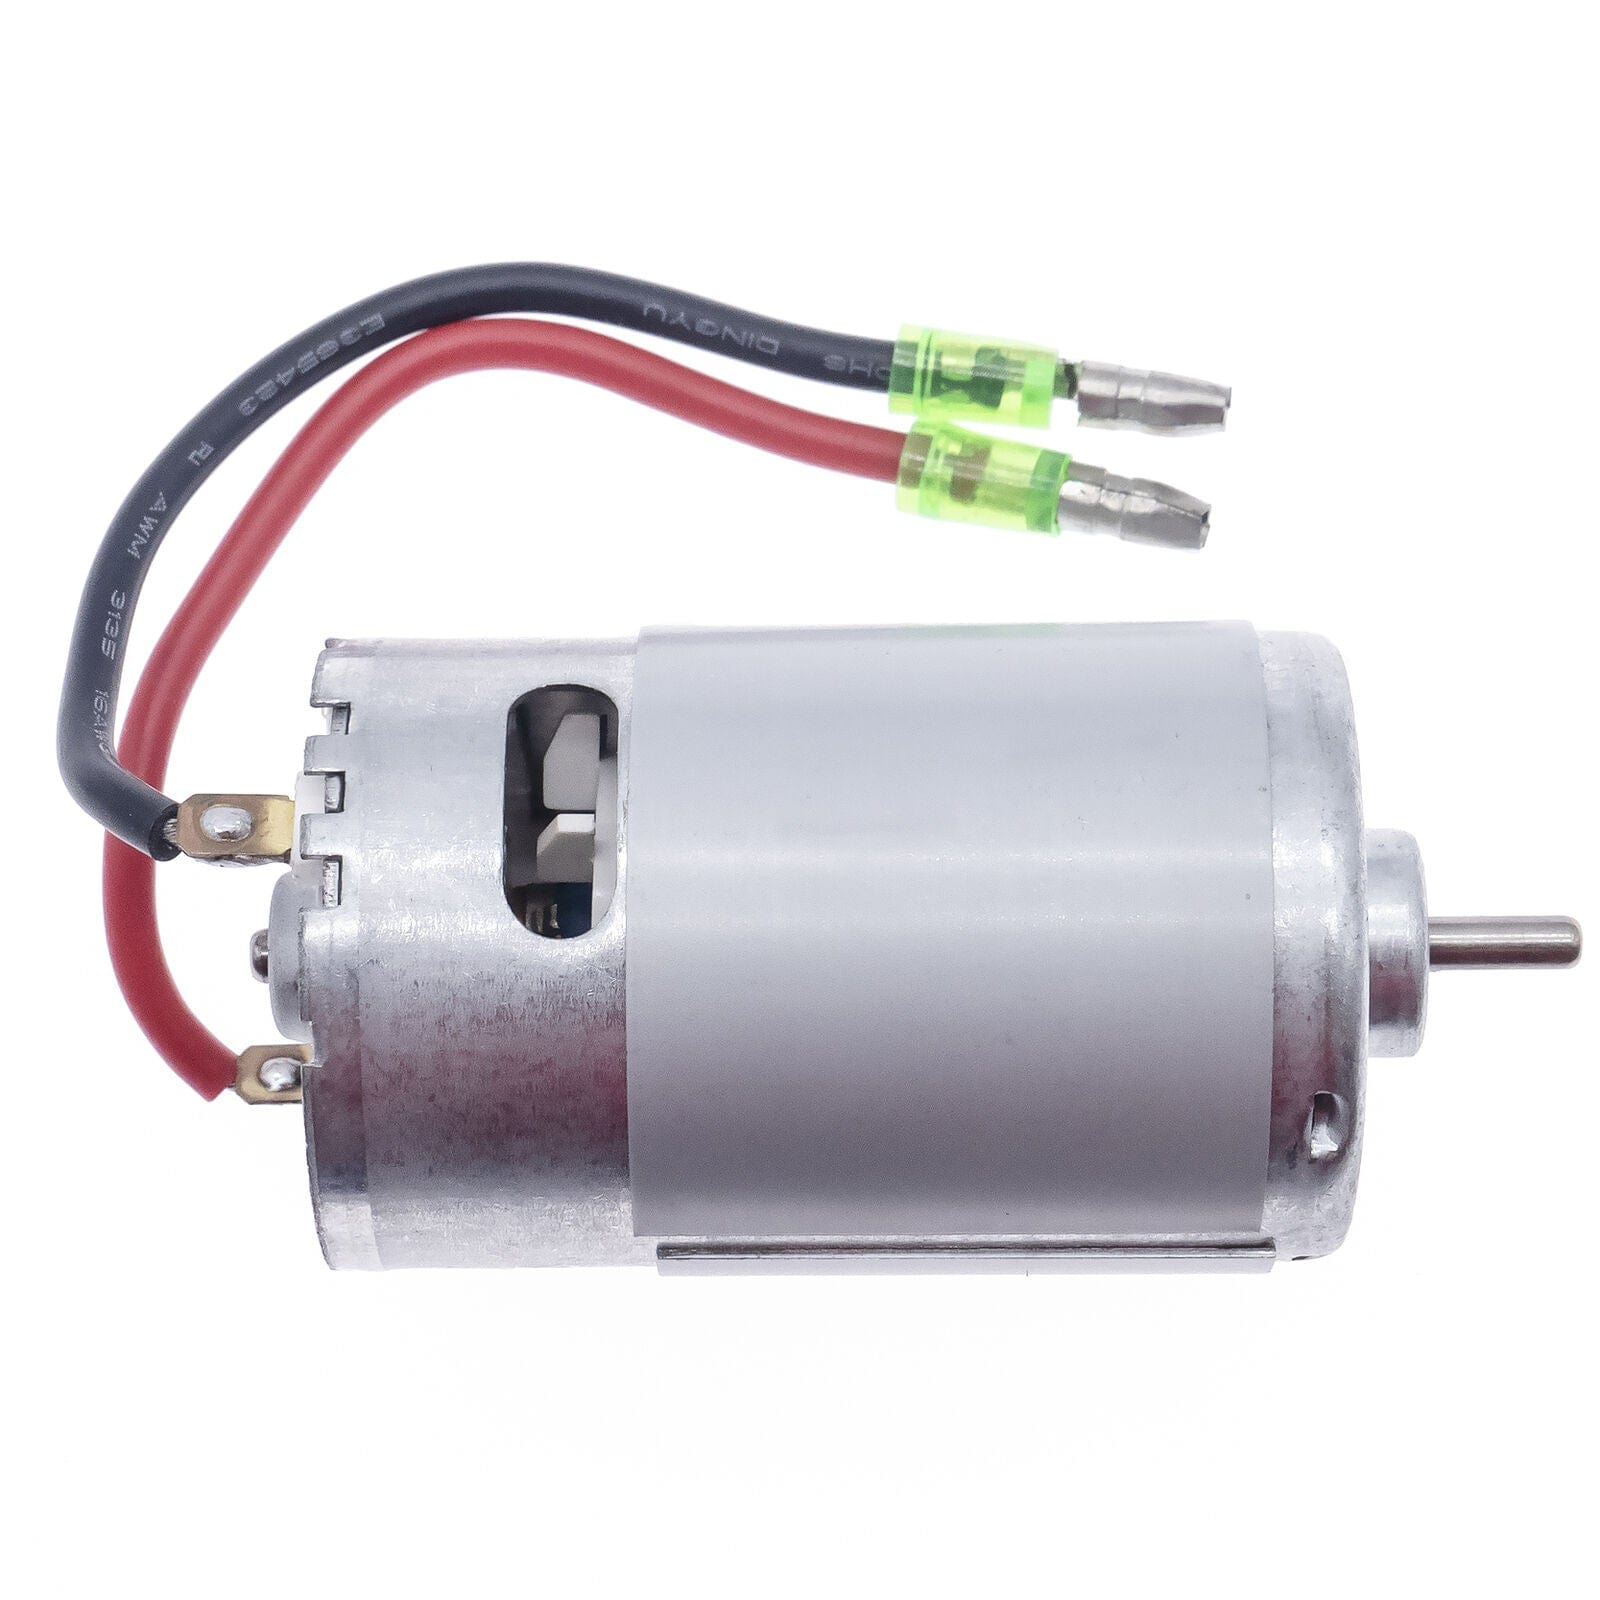 RCAWD ECX UPGRADE PARTS RCAWD Brushed Motor 550 Size FOR 1-10 ECX 2WD Series AMP DB CRUSH/K&N Torment